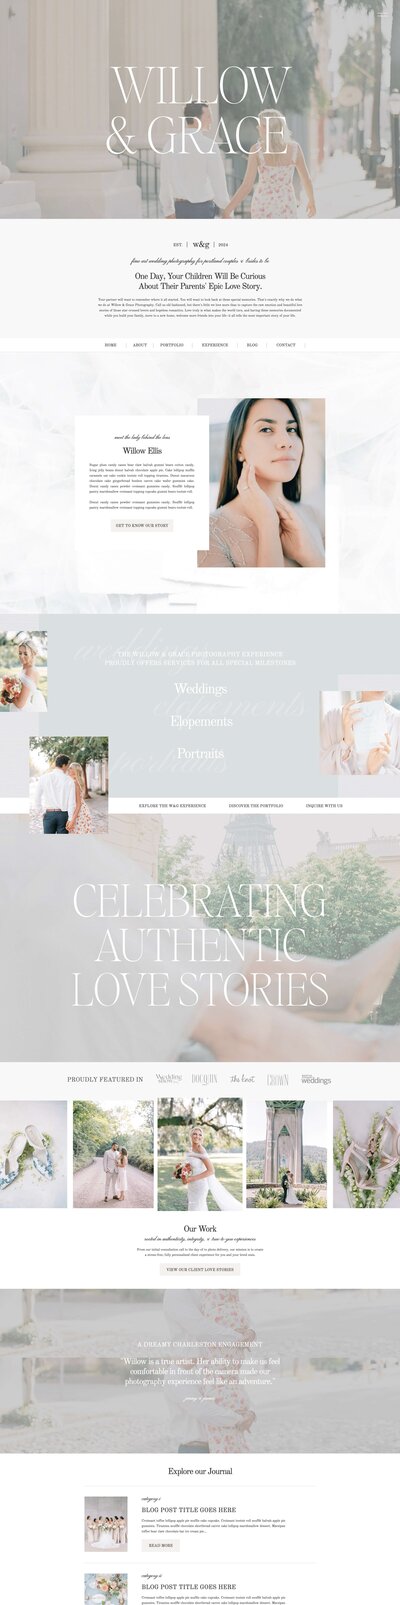 Willow & Grace Showit website template for photographers and creatives.